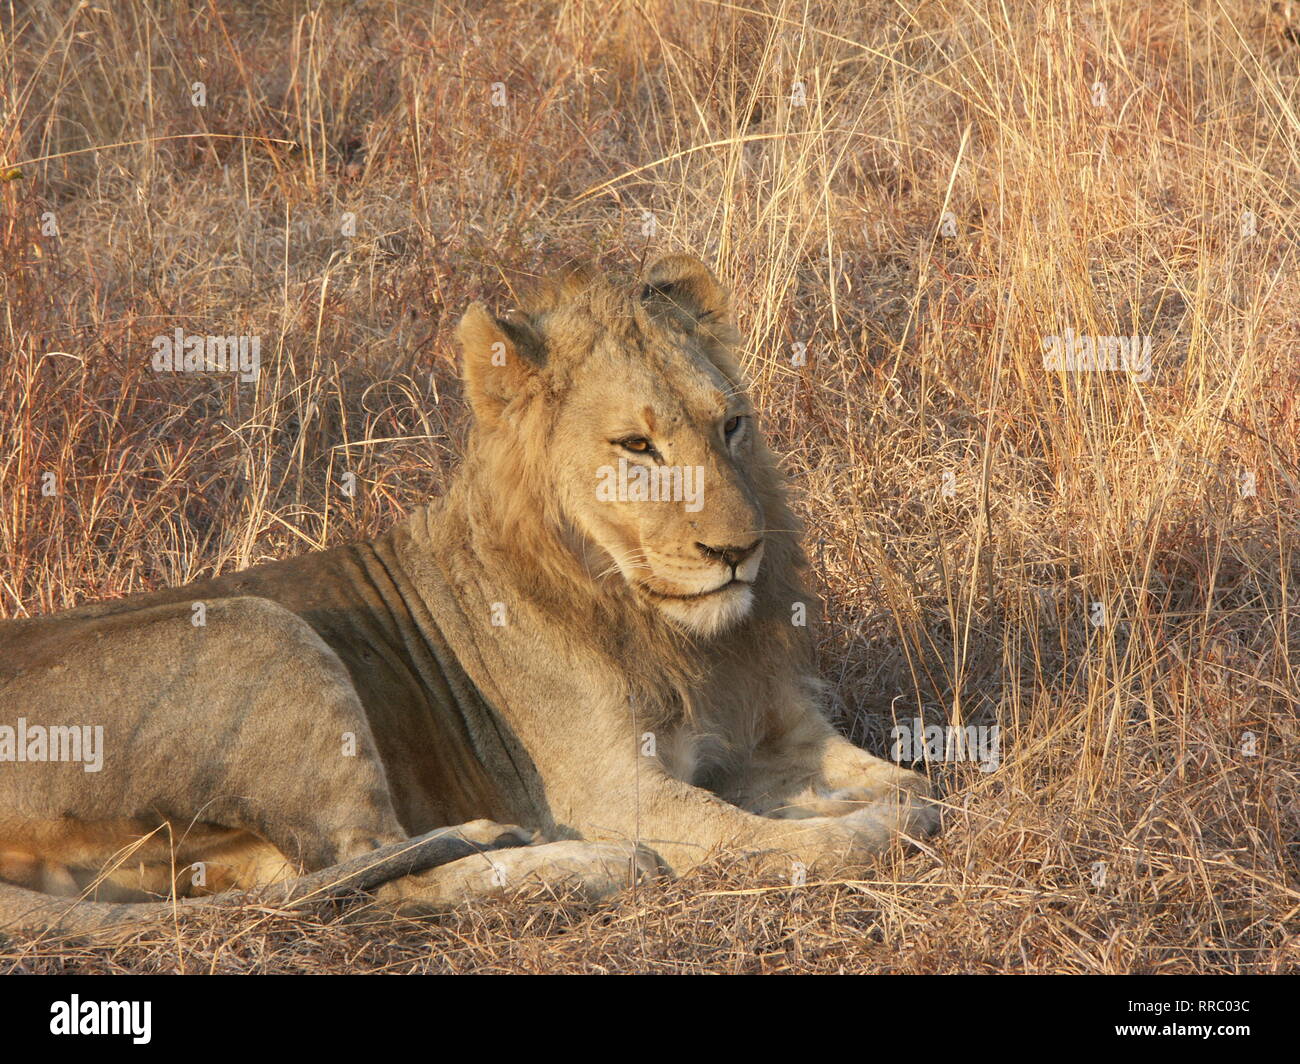 Lion nearly falling asleep while sitting in brown grass. Stock Photo